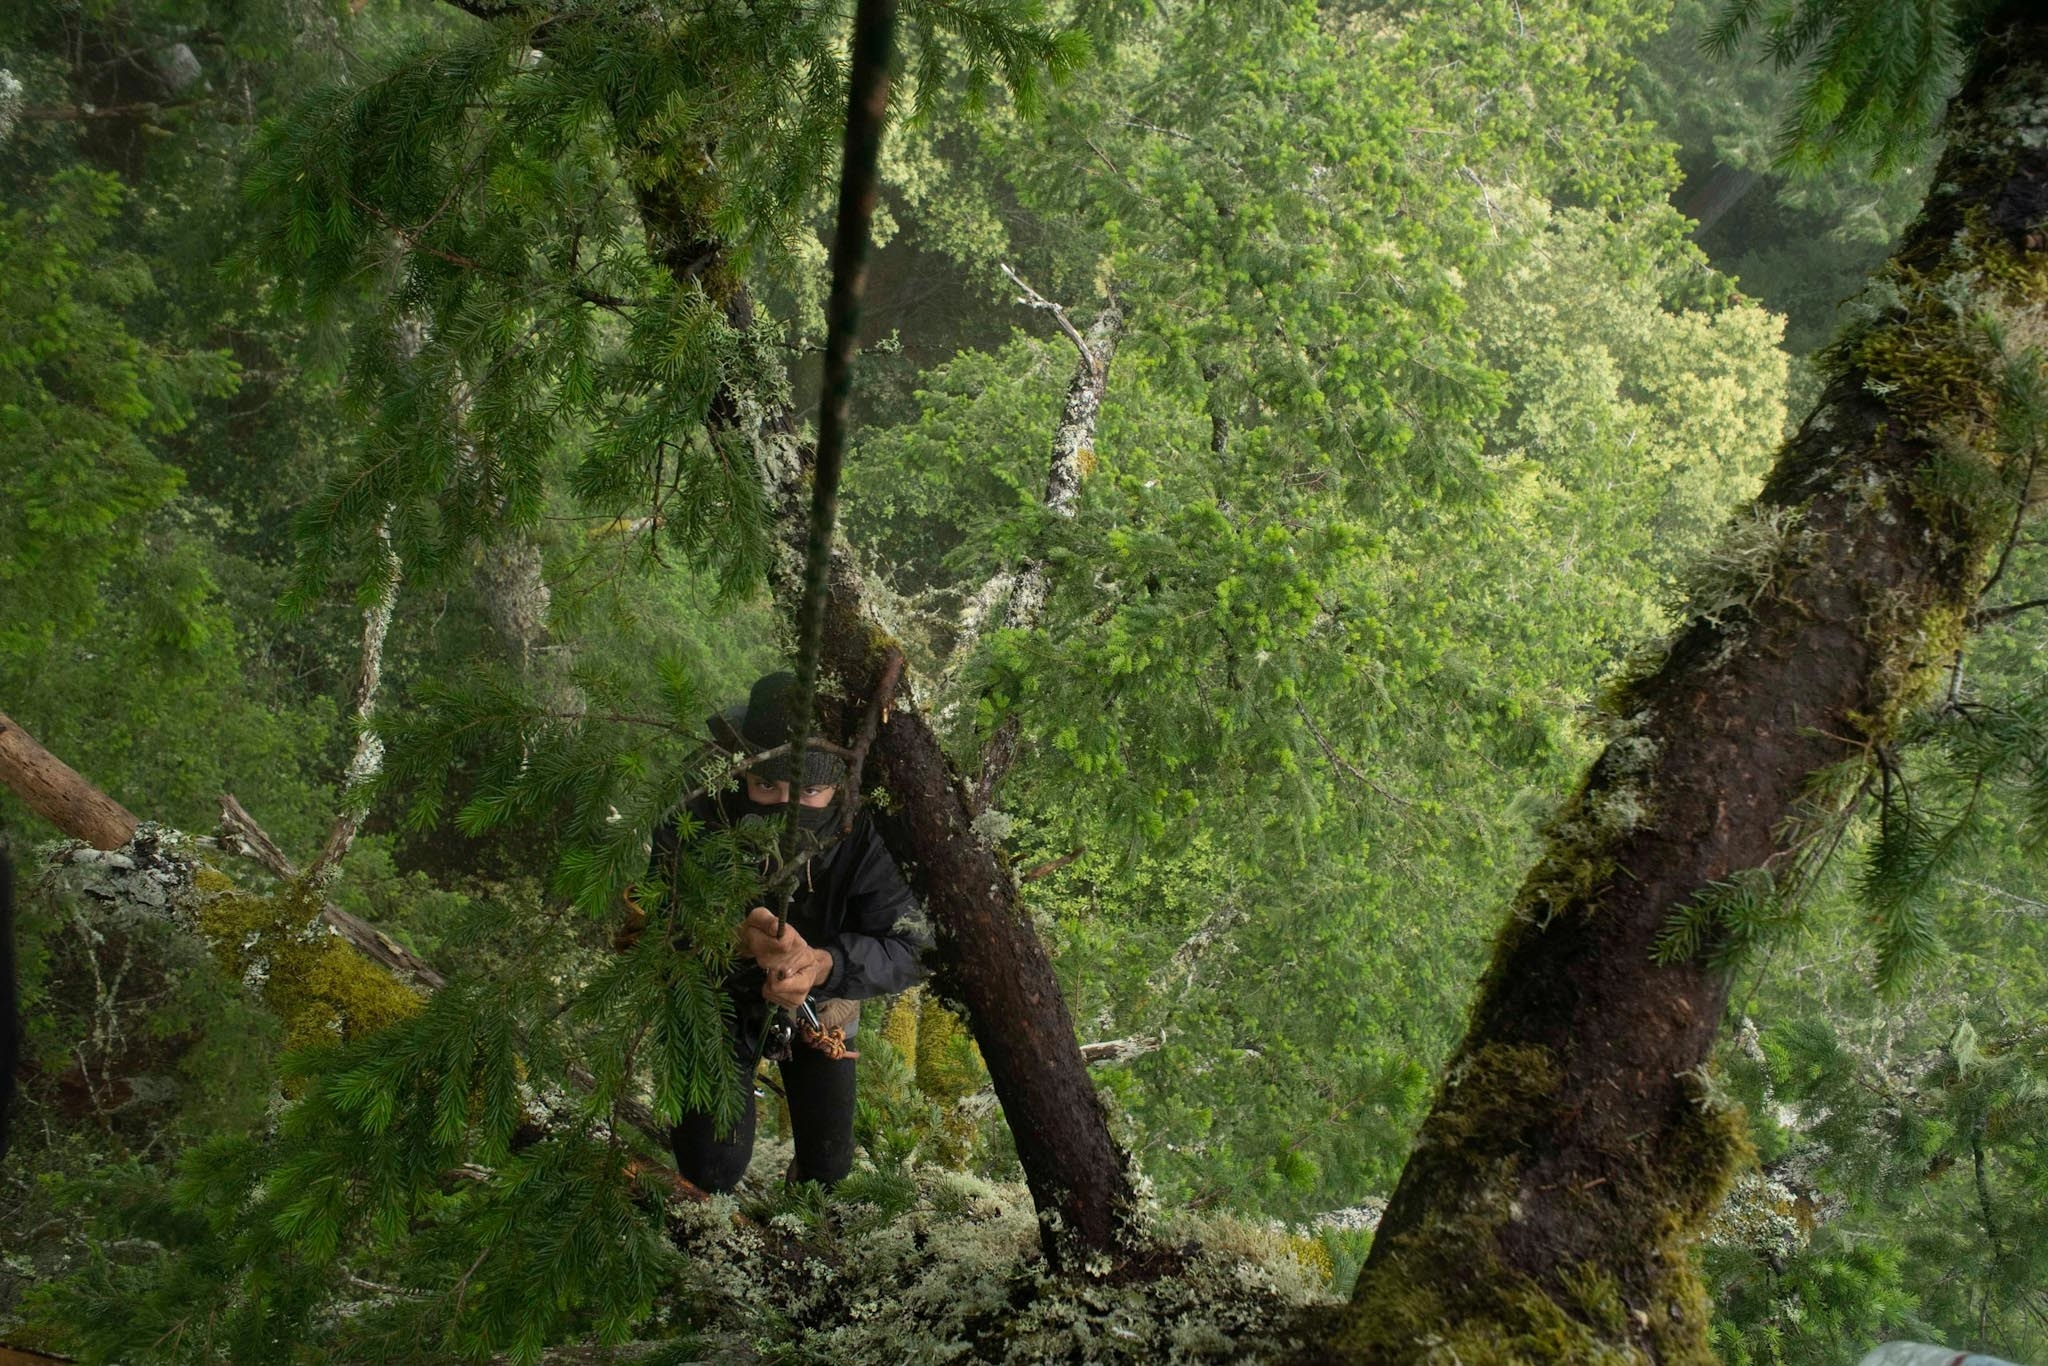 A person wearing a mask climbing ropes on a tree